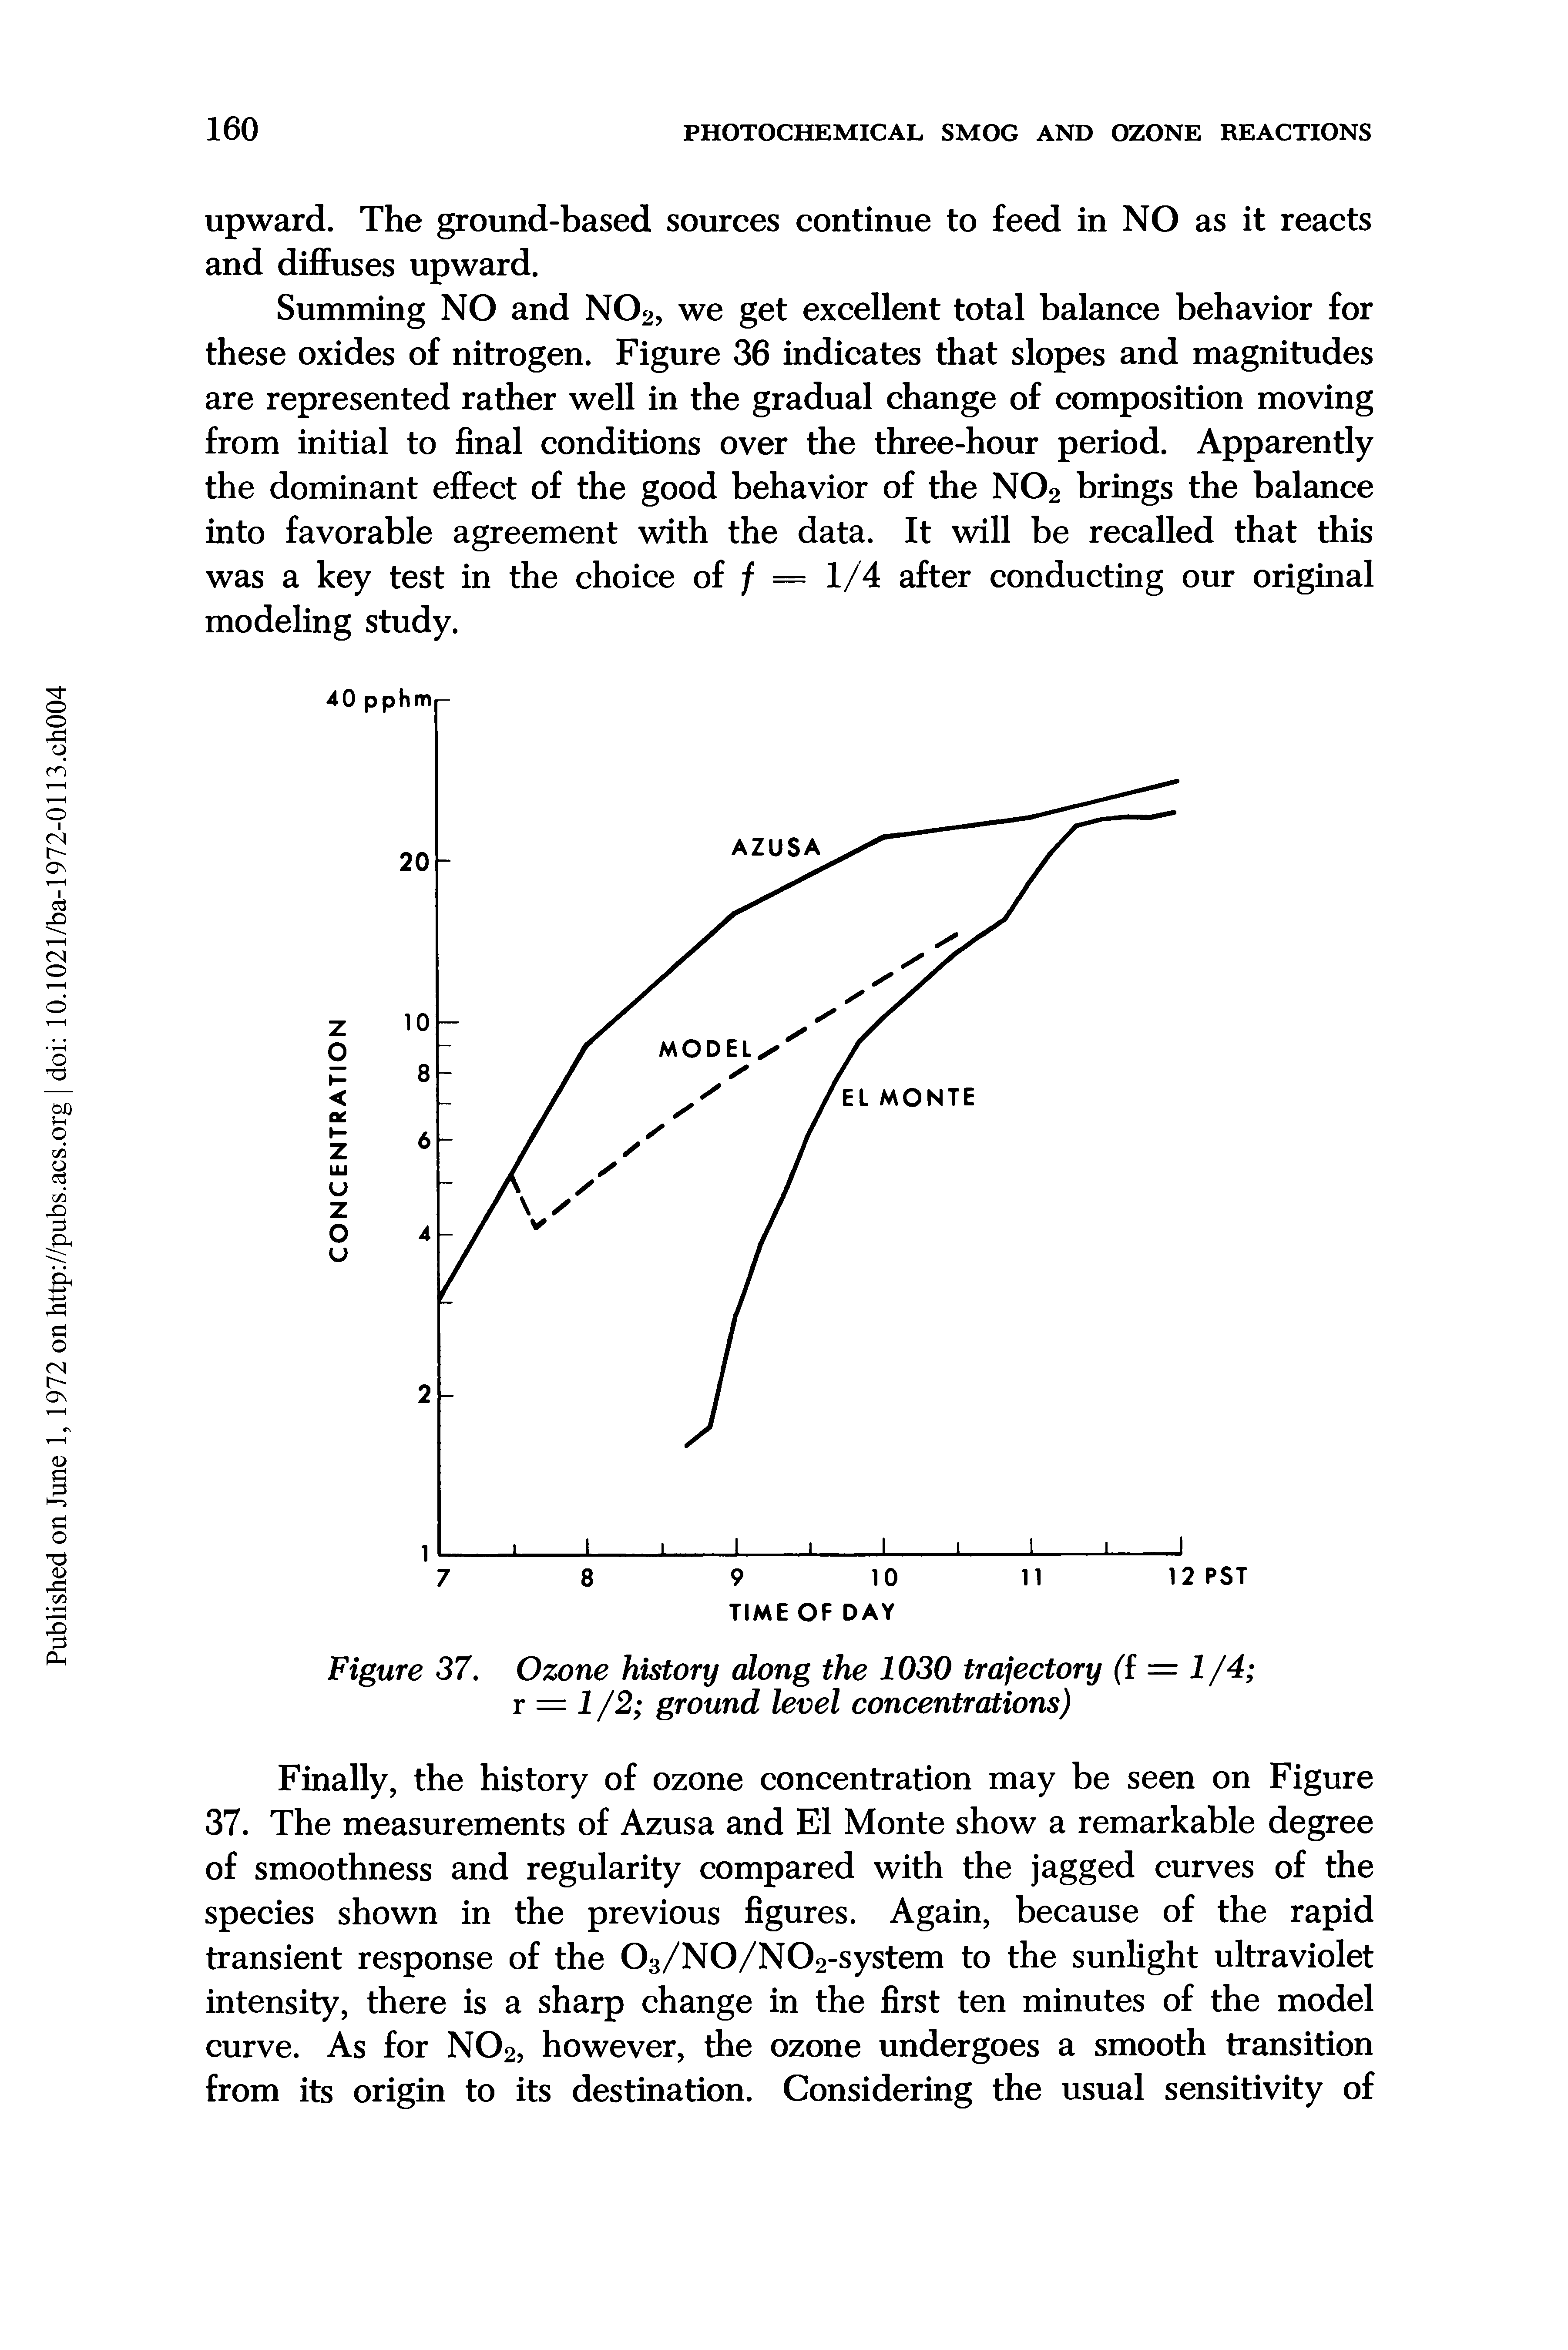 Figure 37. Ozone history along the 1030 trajectory (i = 1/4 r = 1 /2 ground level concentrations)...